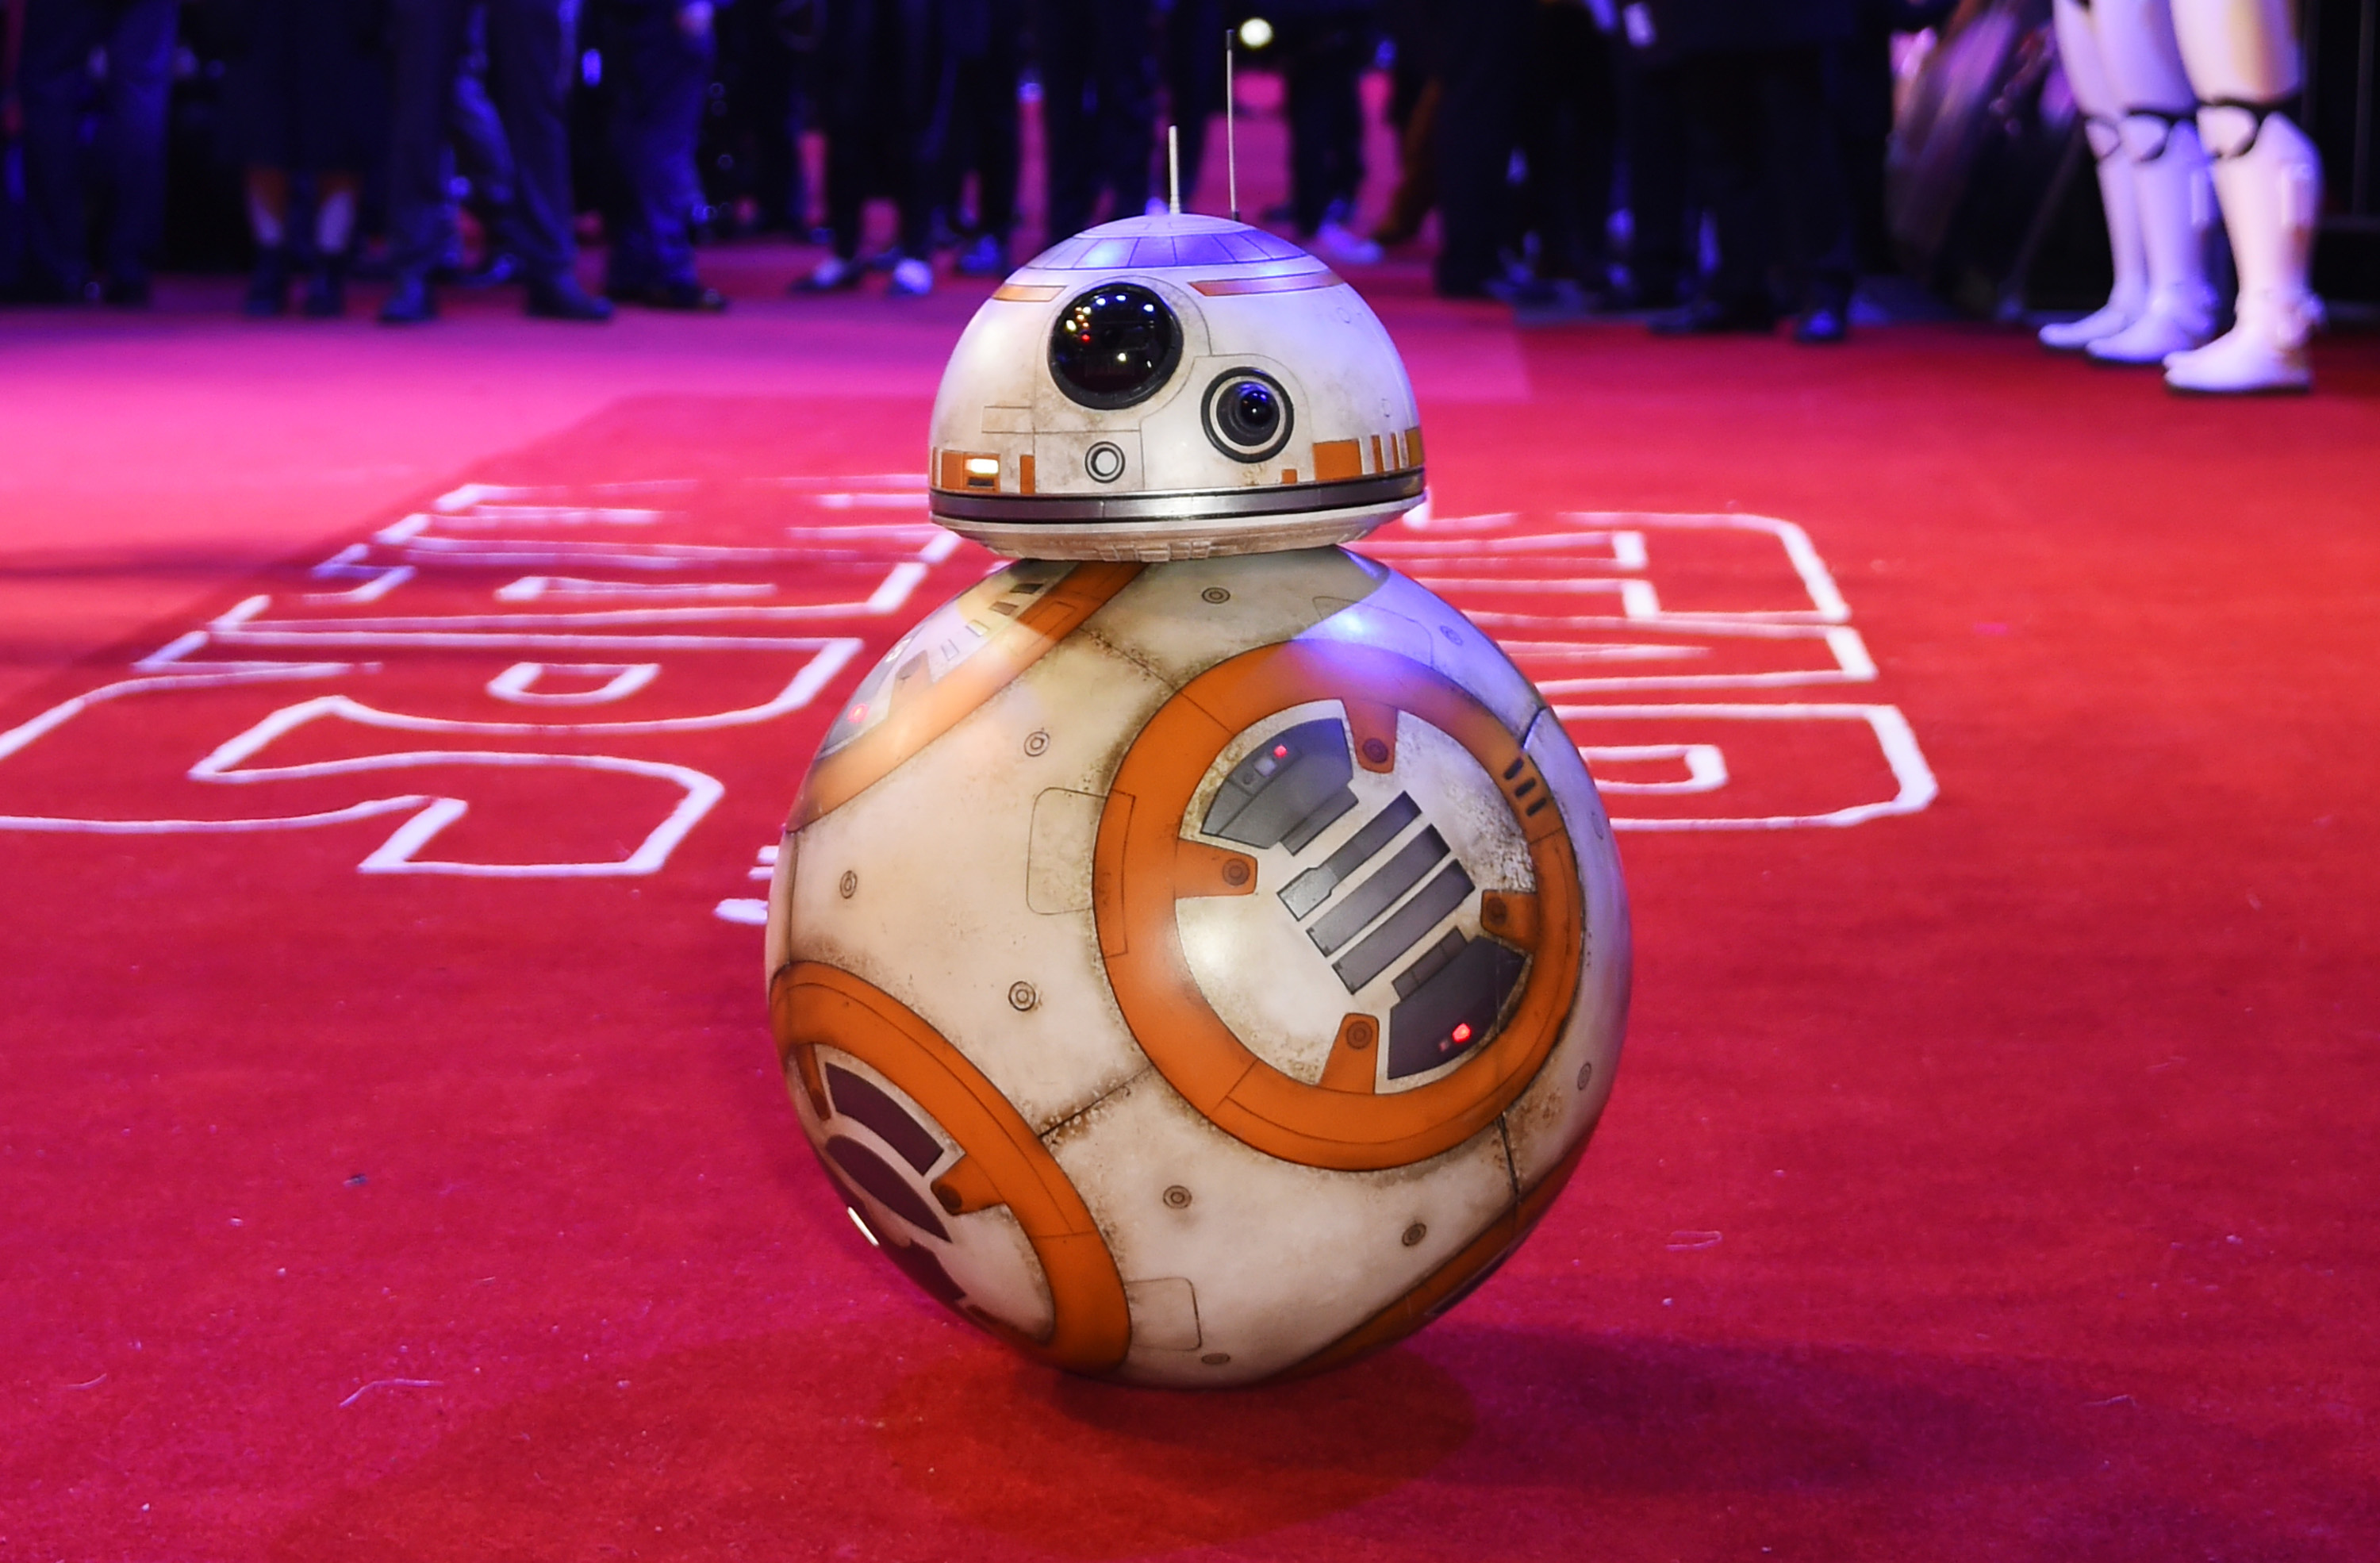 Droid BB-8 attends the European Premiere of "Star Wars: The Force Awakens" on December 16, 2015 in London, England. (David M. Benett--2015 David M. Benett/Getty Images)